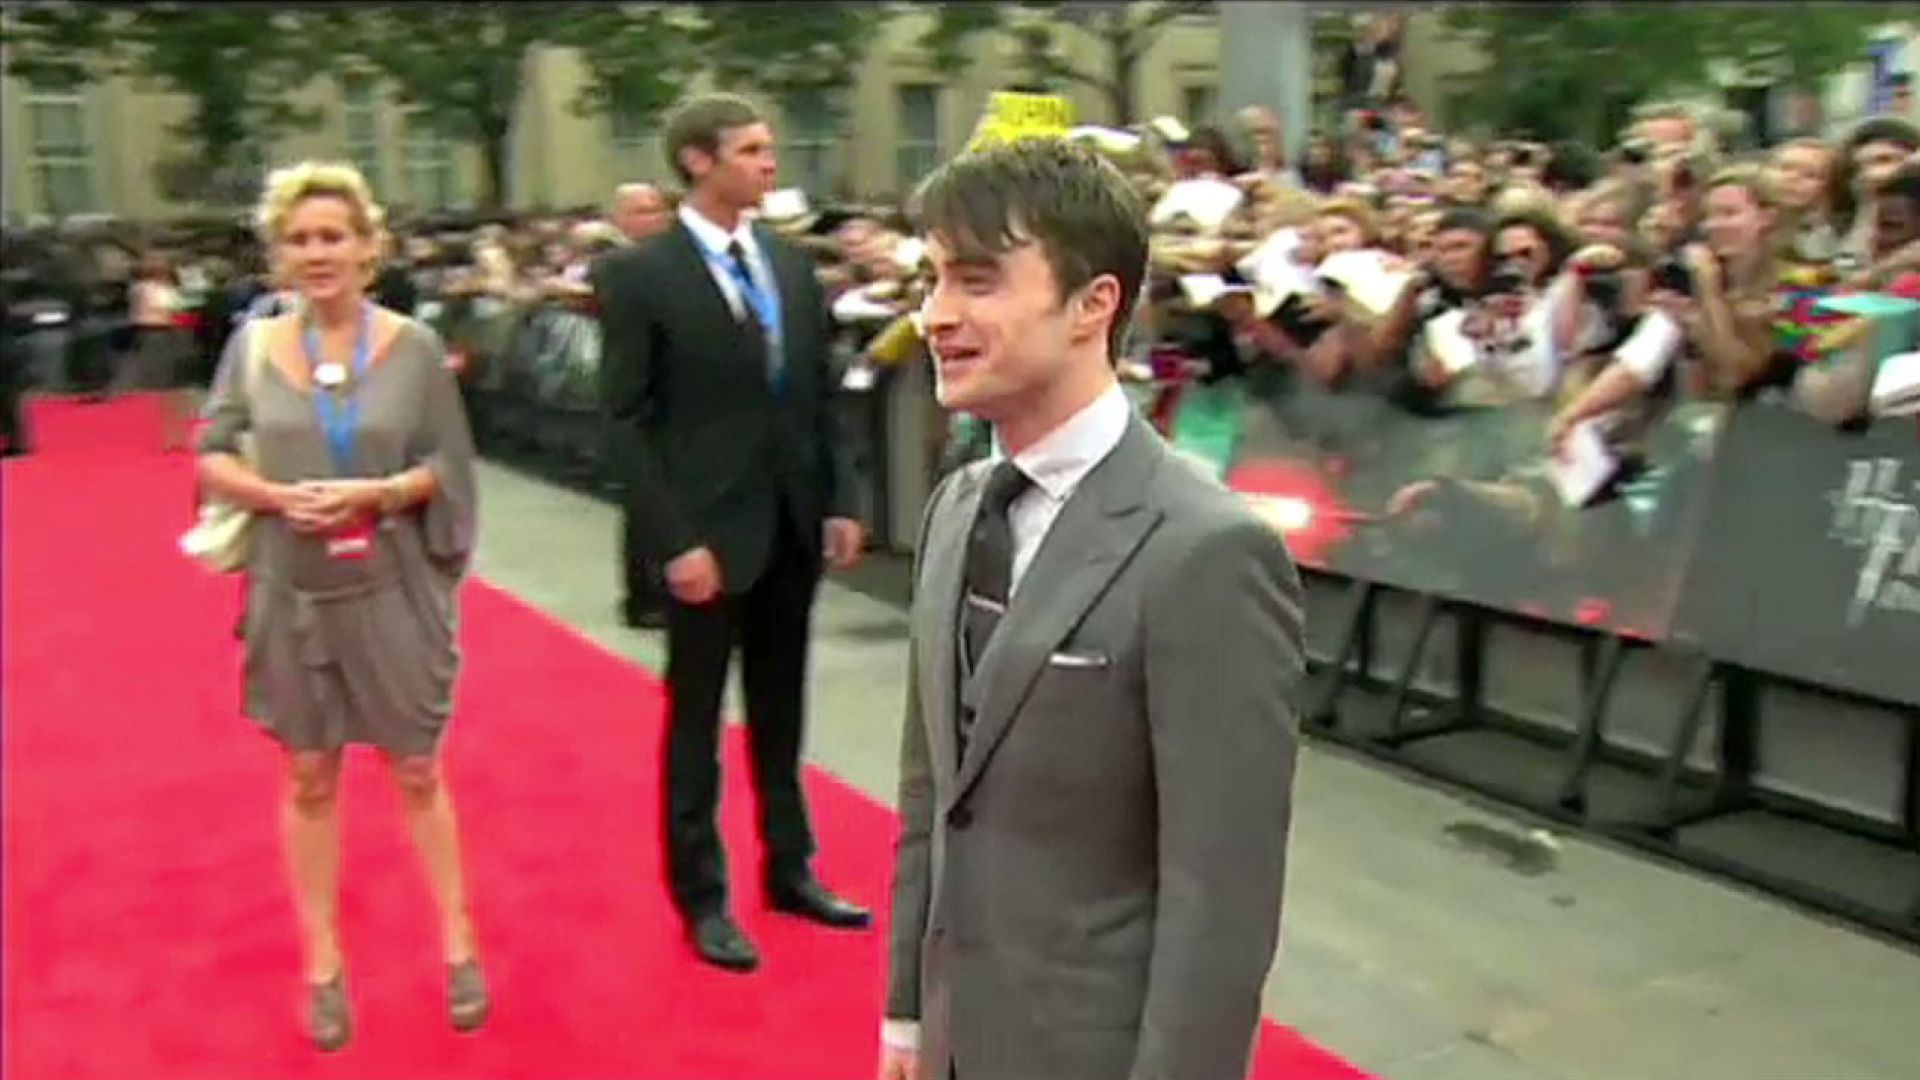 Harry Potter and the Deathly Hallows Part 2 World Premiere, Trafalgar Square